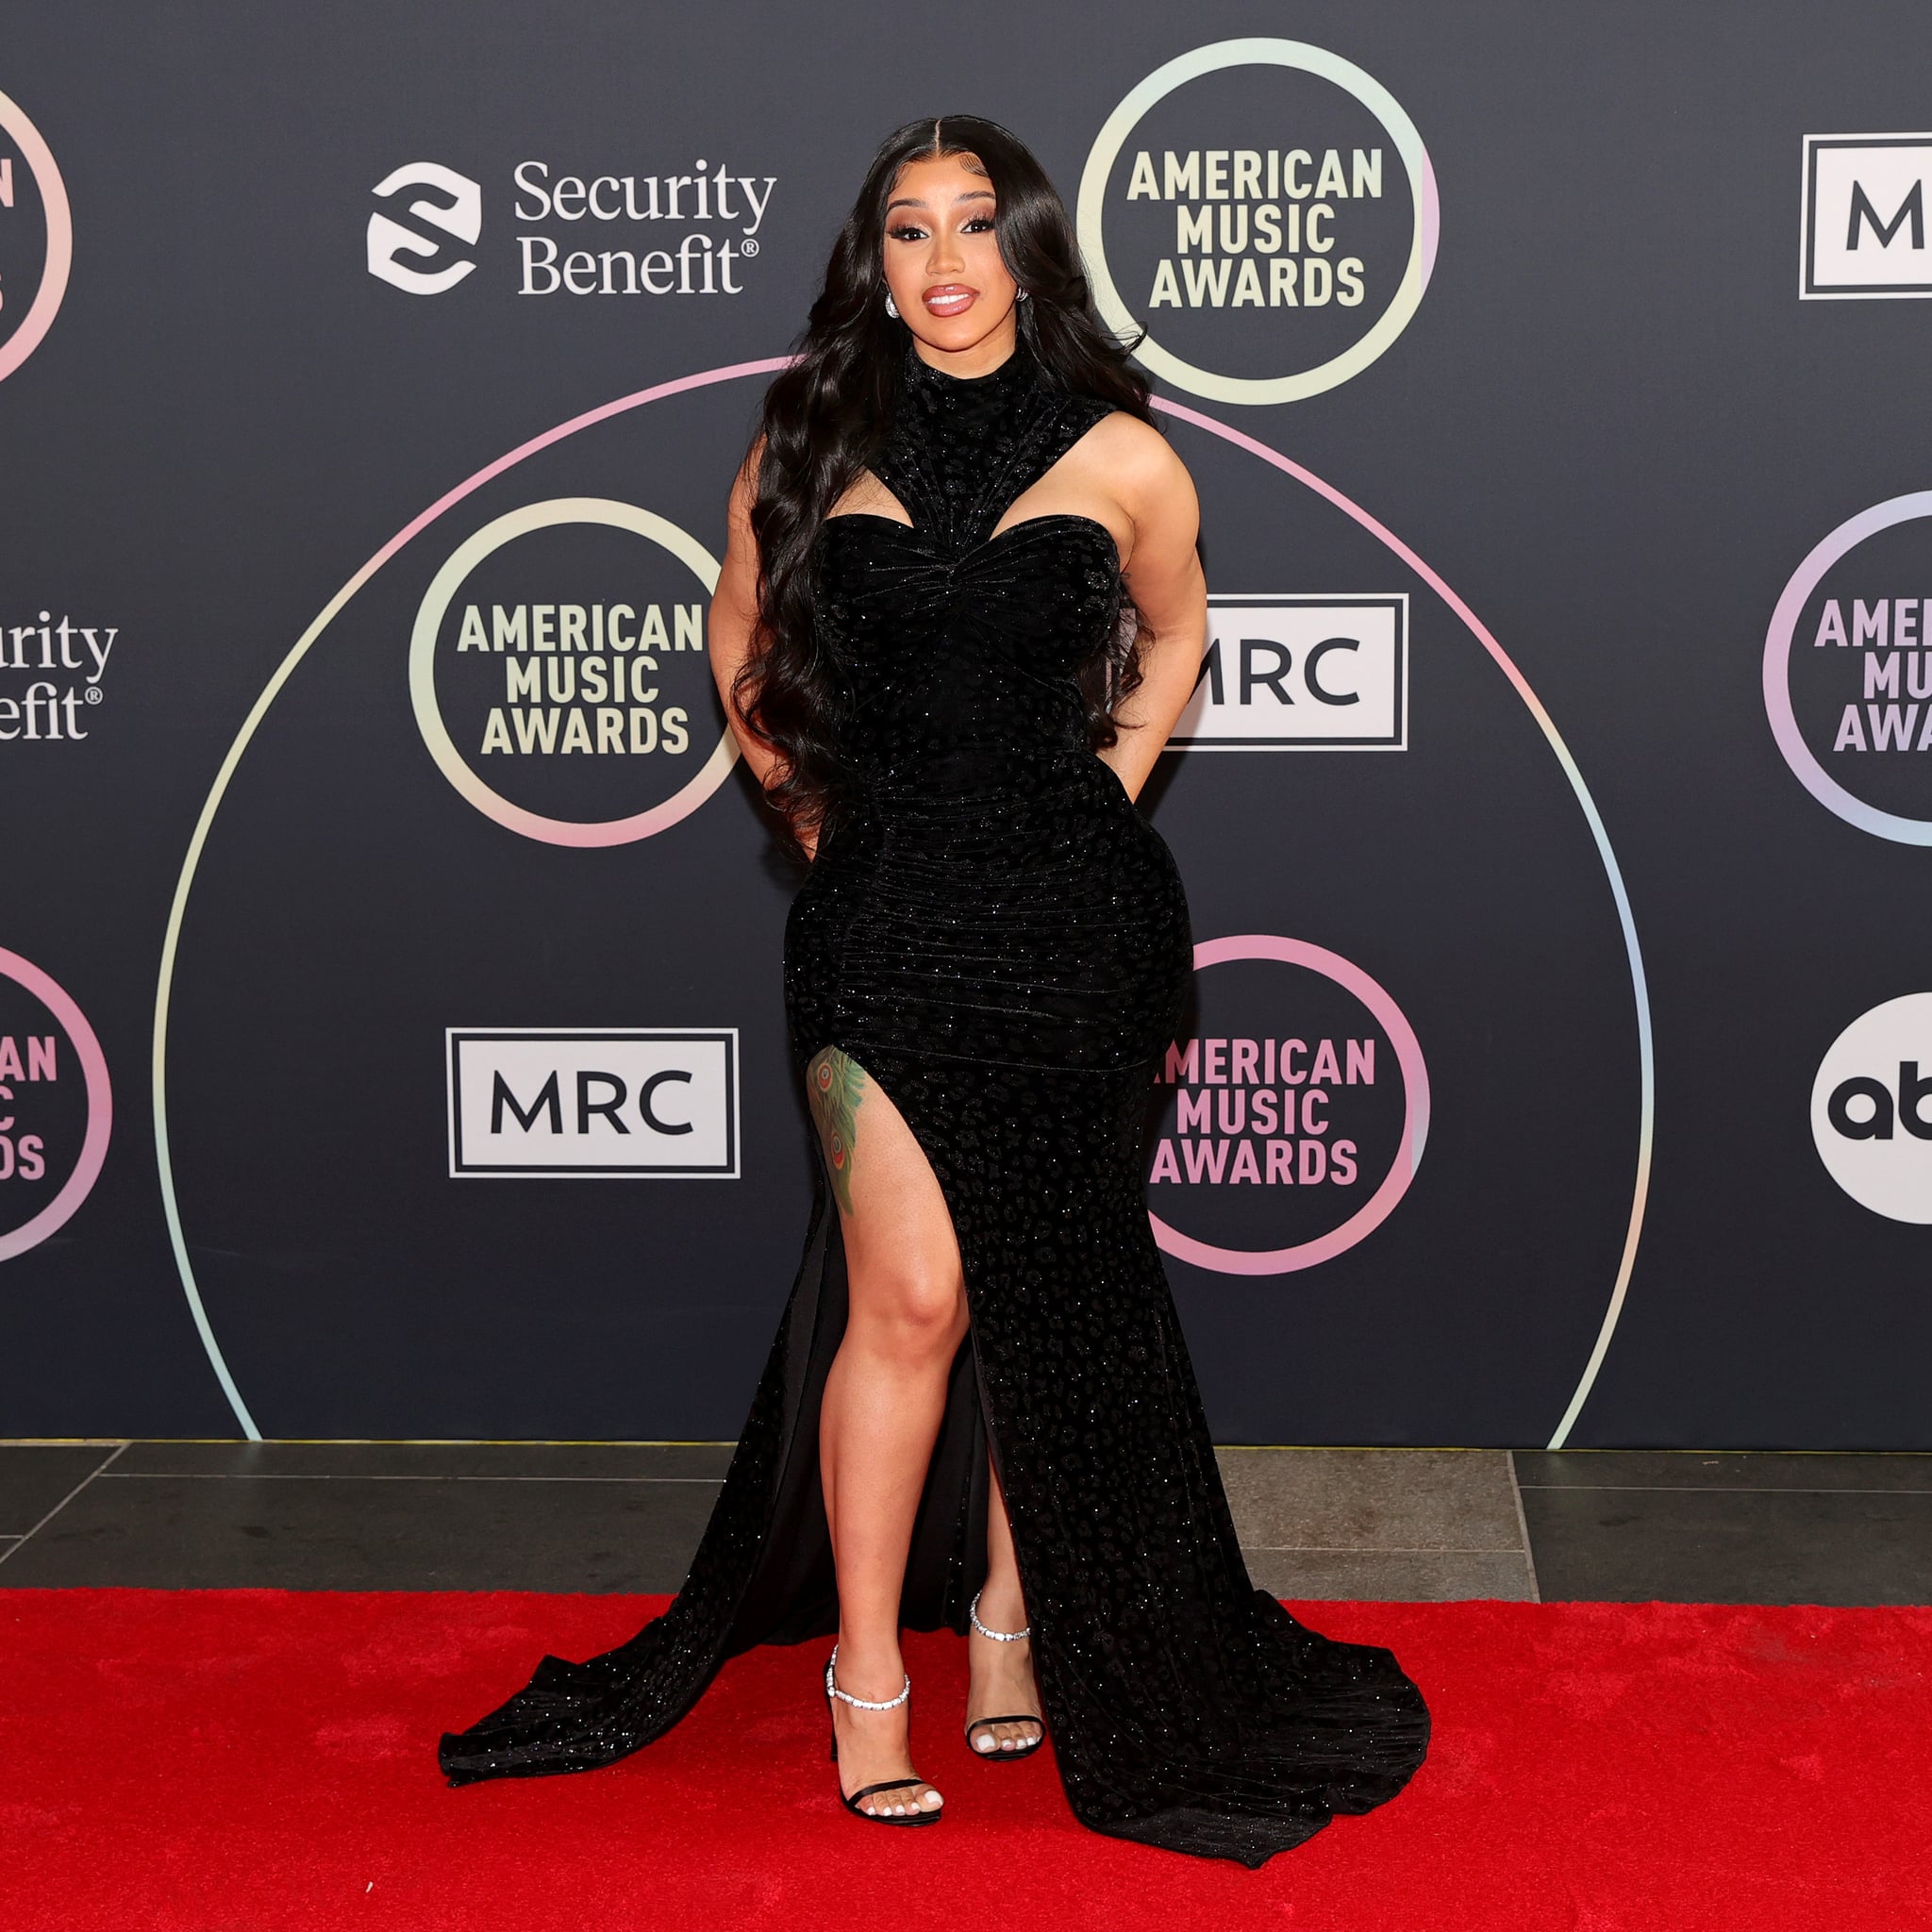 LOS ANGELES, CALIFORNIA - NOVEMBER 19: Host Cardi B attends the 2021 American Music Awards Red Carpet Roll-Out with Host Cardi B at L.A. LIVE on November 19, 2021 in Los Angeles, California. (Photo by Rich Fury/Getty Images)